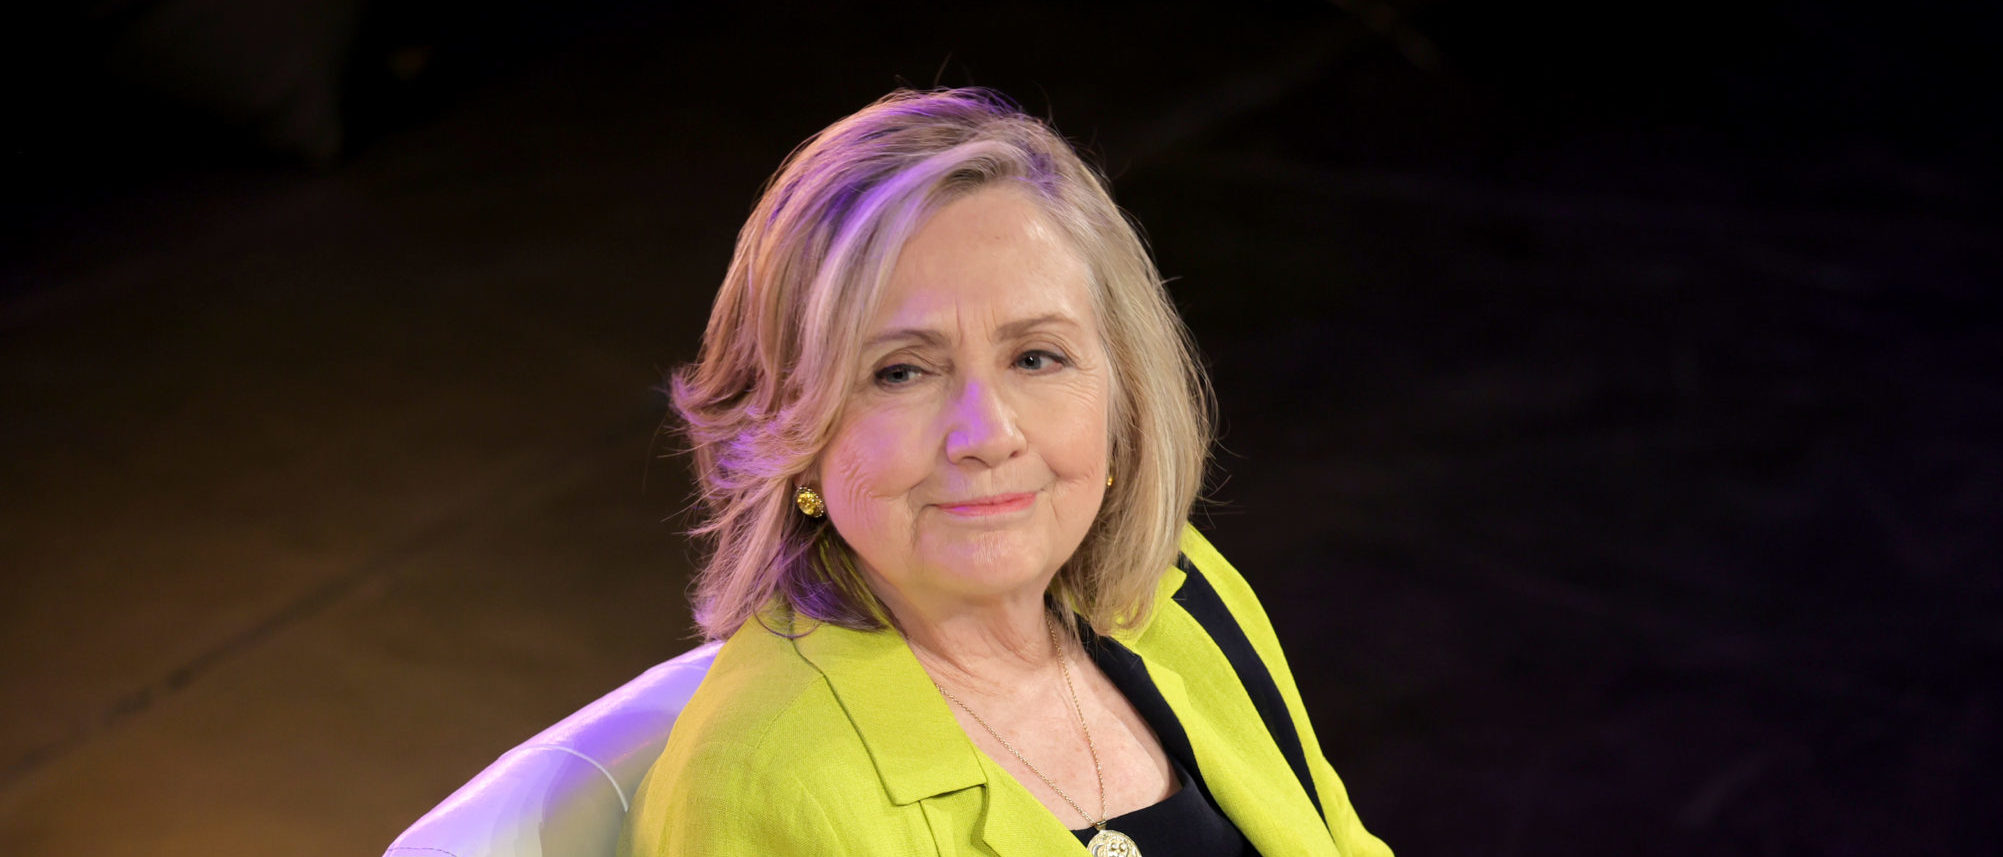 NEW YORK, NEW YORK - JULY 08: Hillary Clinton takes part in a panel discussion during BroadwayCon 2022 at The Manhattan Center on July 08, 2022 in New York City. (Photo by Michael Loccisano/Getty Images)